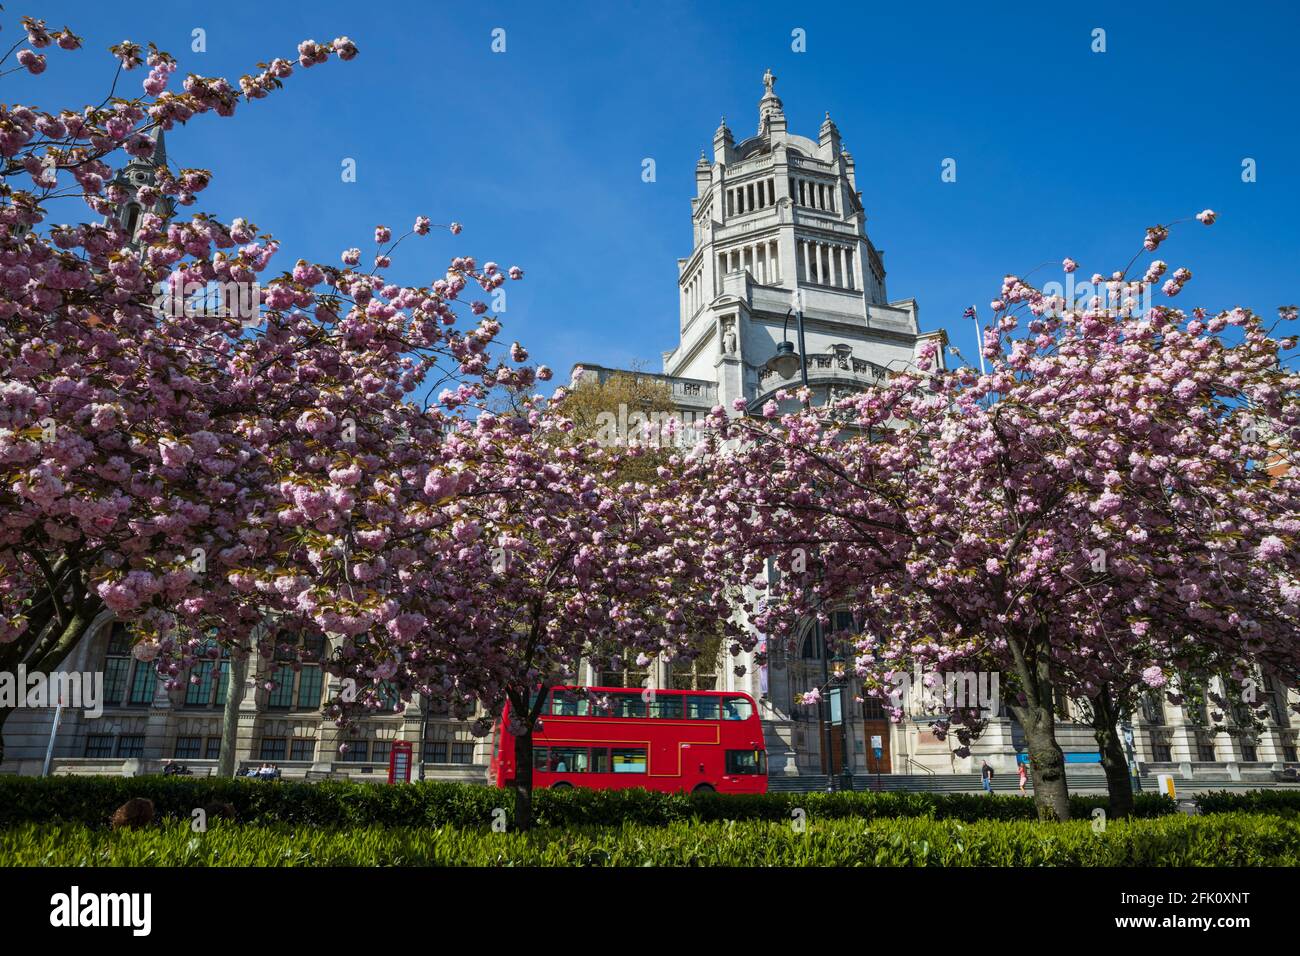 Pink blossom trees in front of the Victoria and Albert Museum, Cromwell Road, South Kensington, London, United Kingdom, Europe Stock Photo